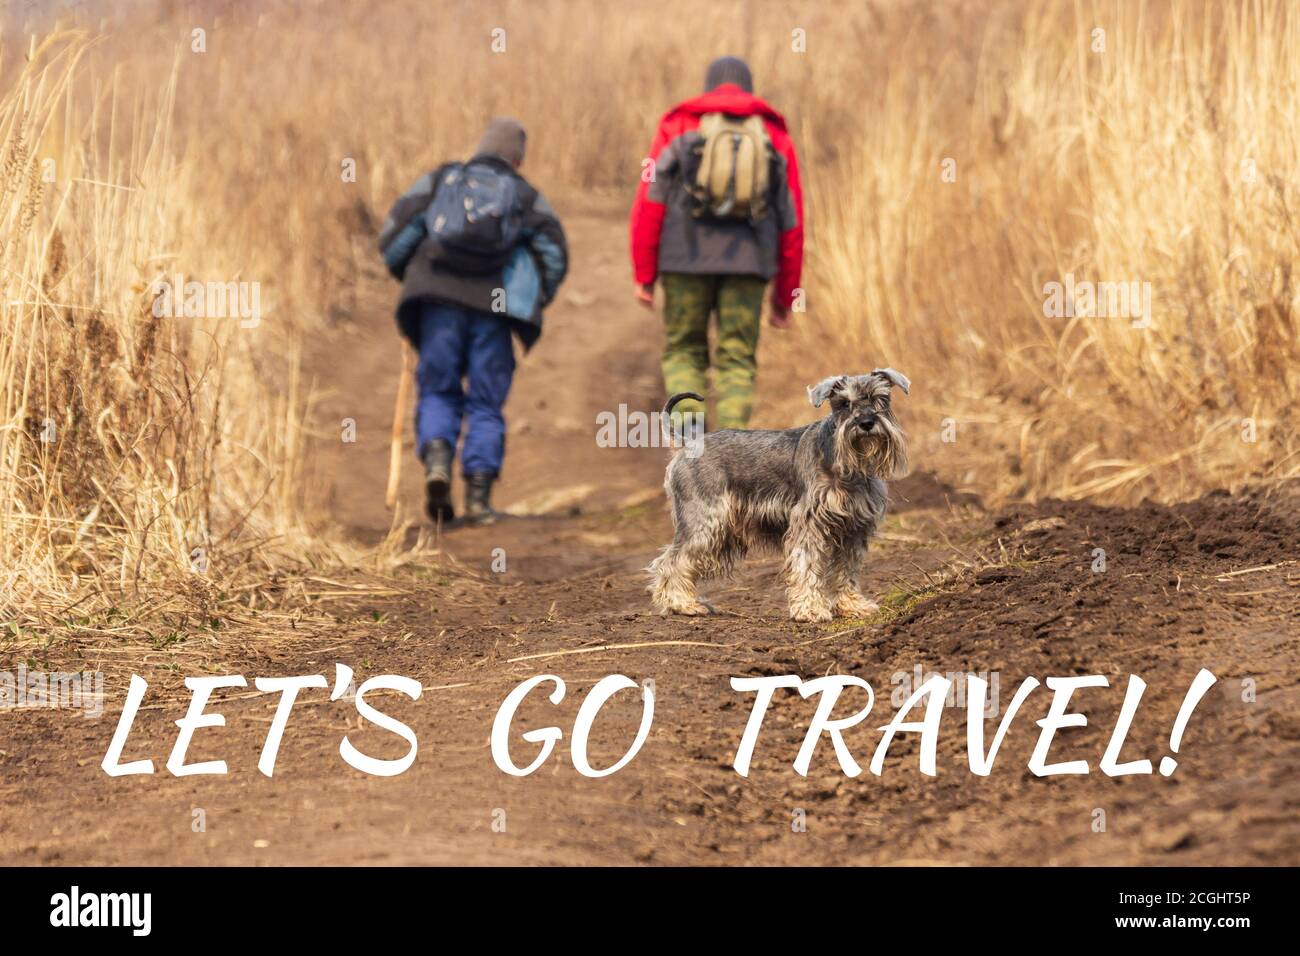 Let's Go Travel! Adventure traveling exploration journey concept. A dog and two tourists with backpacks are invited to go hiking. Stock Photo